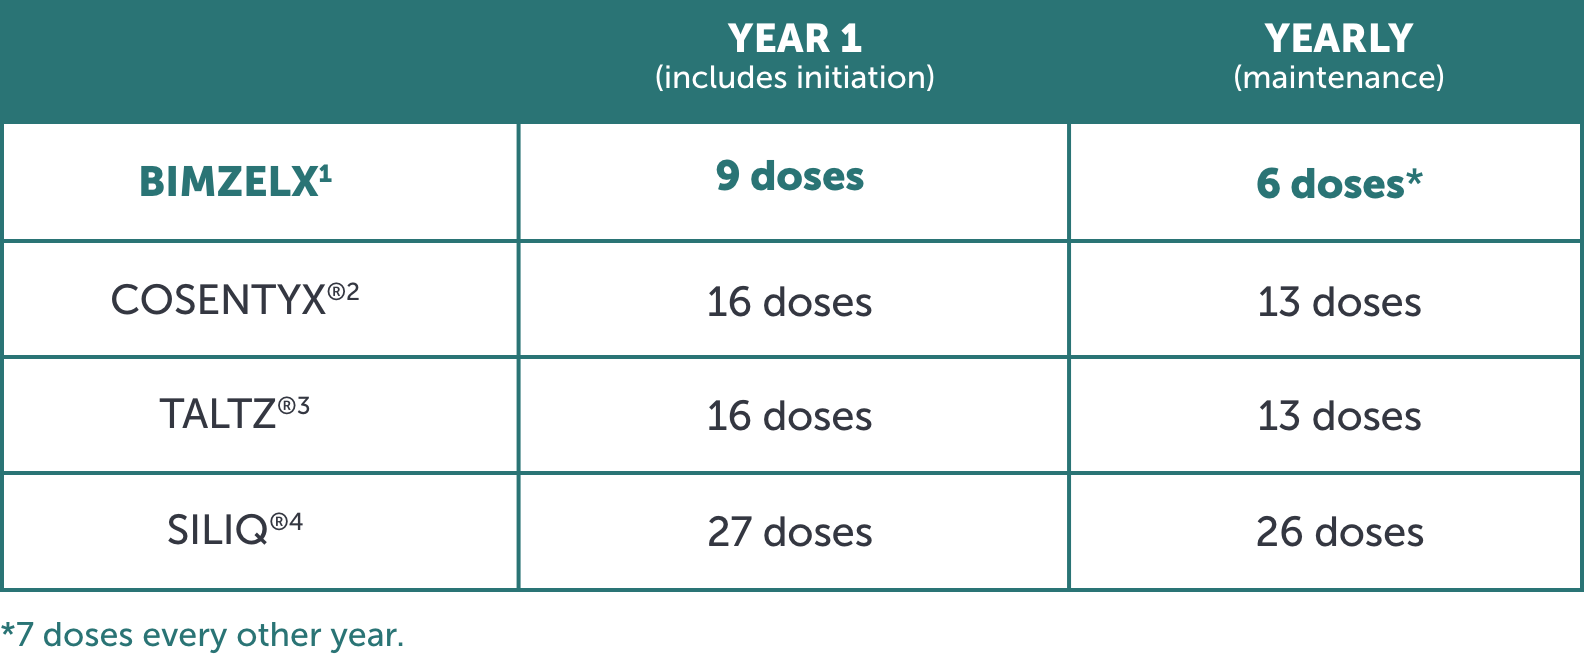 Simple dark teal dosing chart comparing year 1 doses and then yearly maintenance doses for BIMZELX, COSENTYX, TALTZ, and SILIQ.